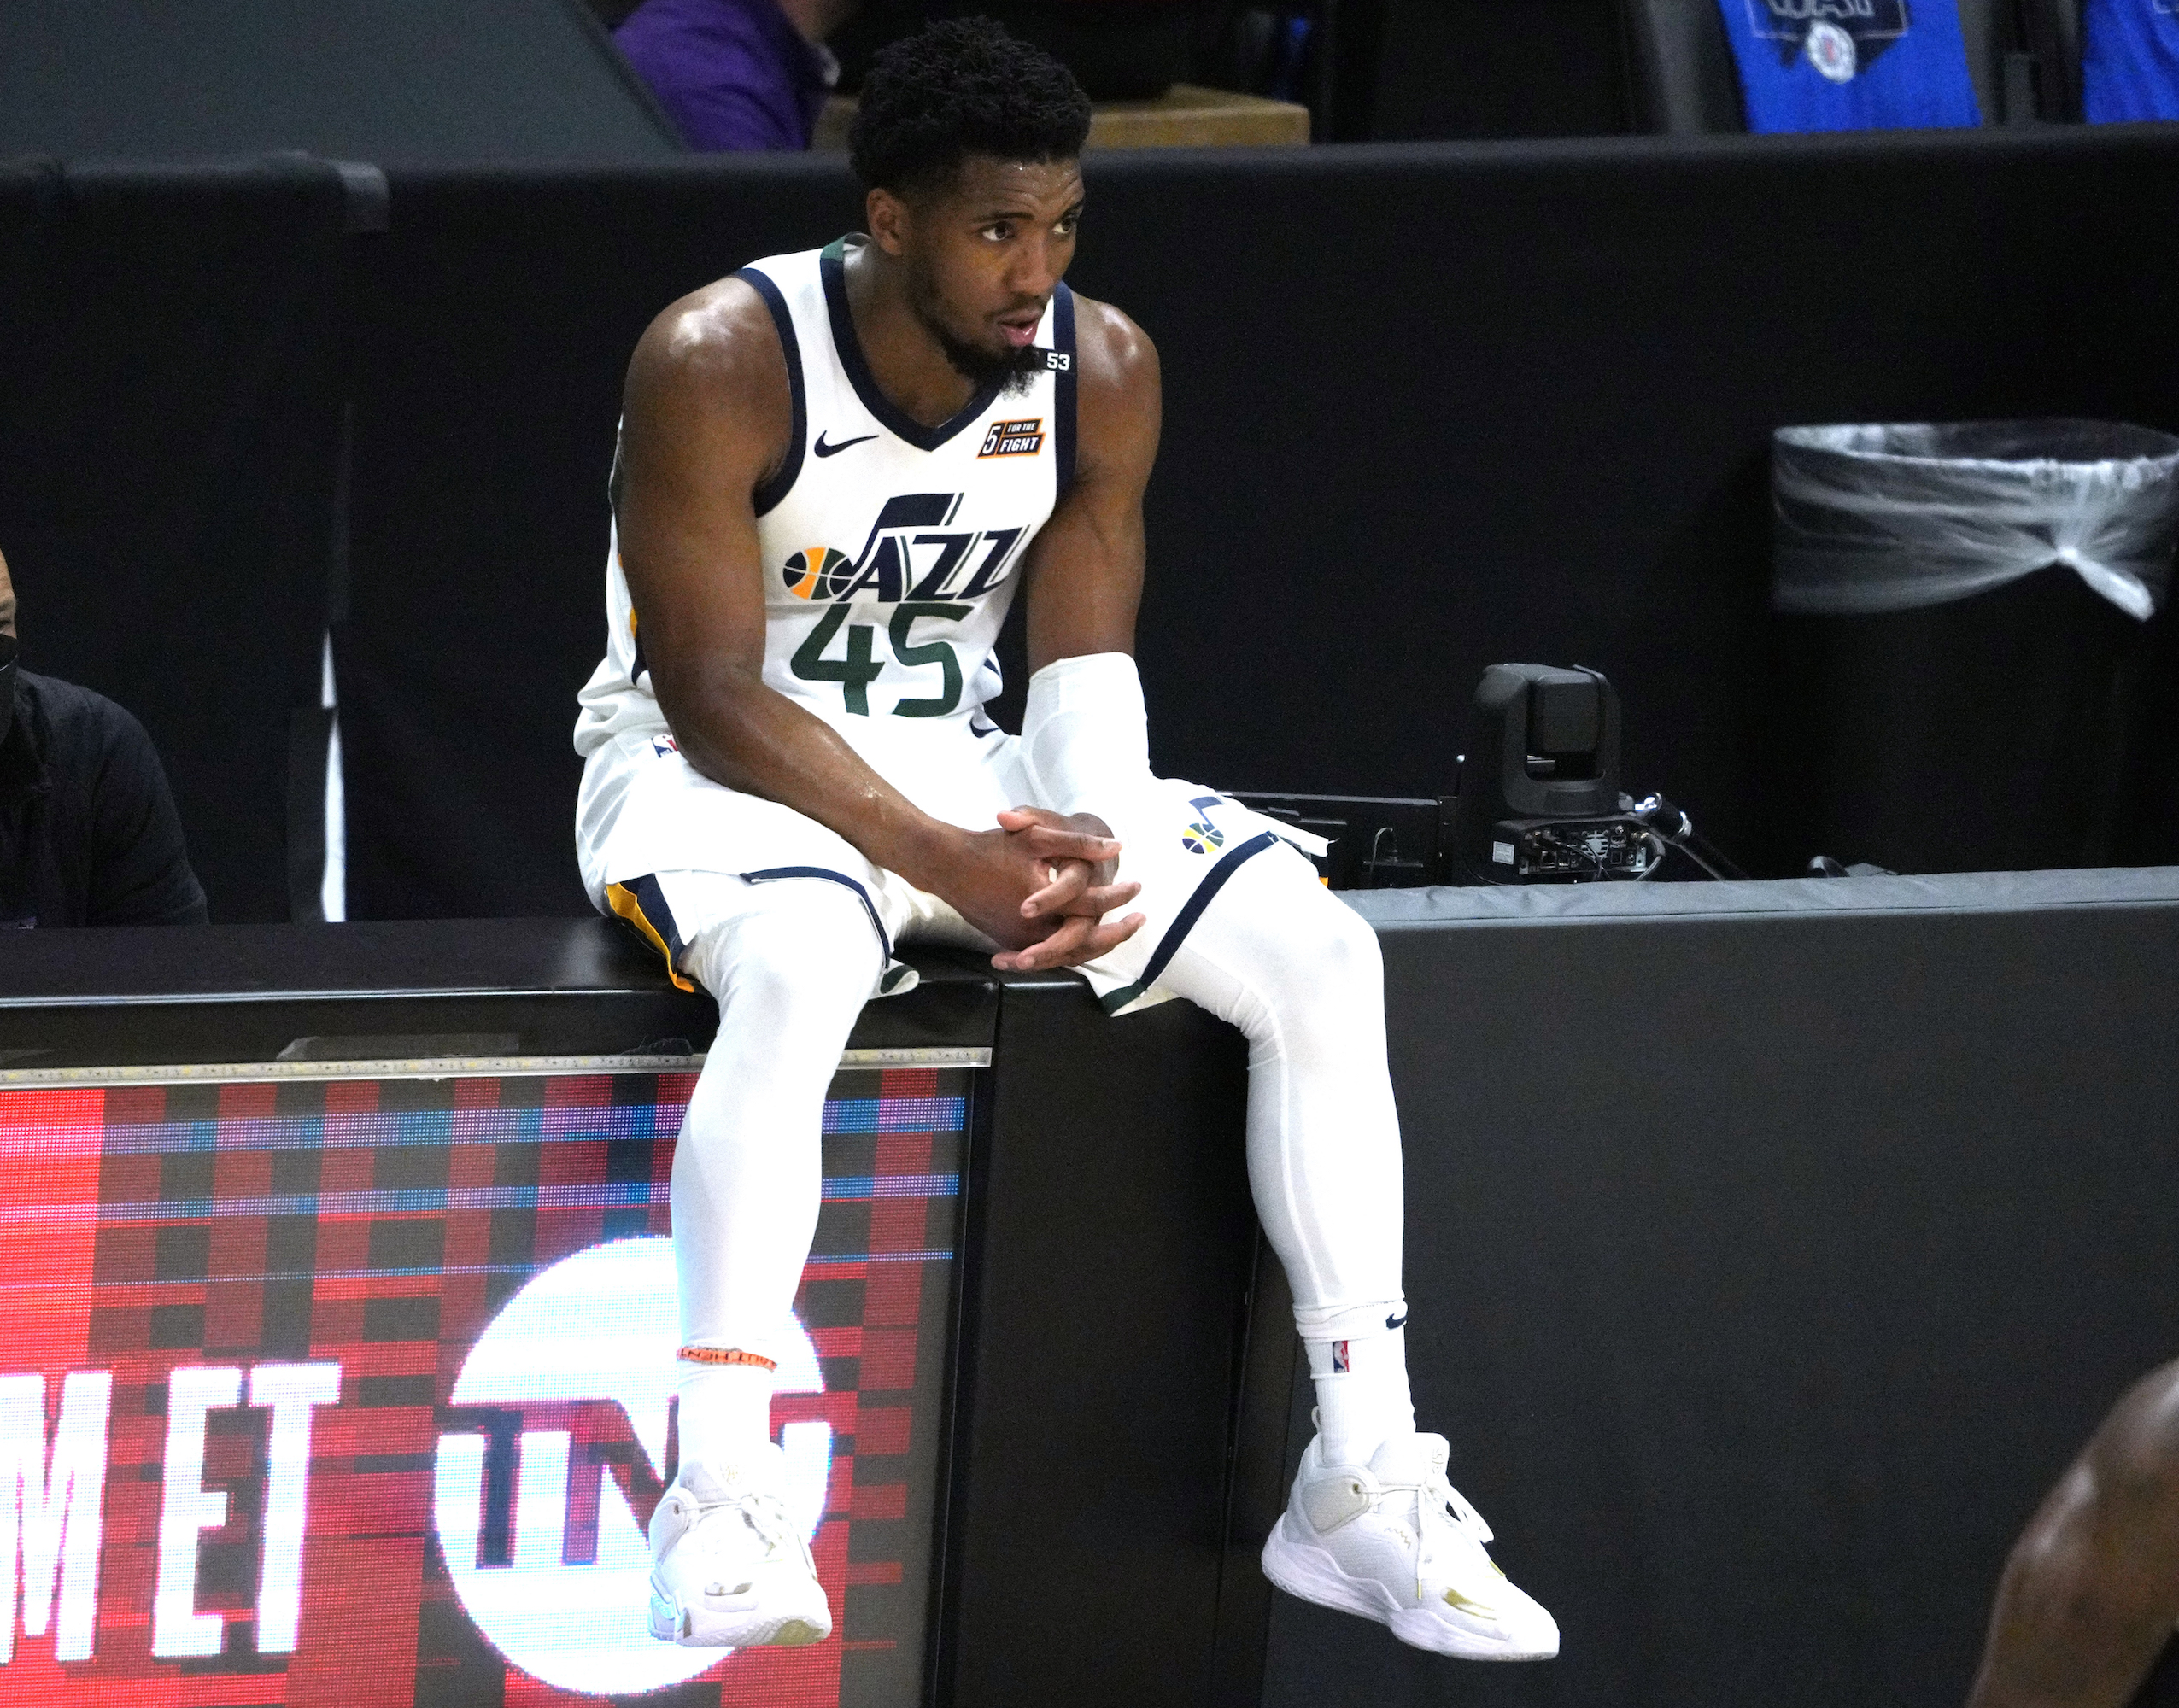 Utah Jazz guard Donovan Mitchell waits to check in during the 2021 NBA playoffs.